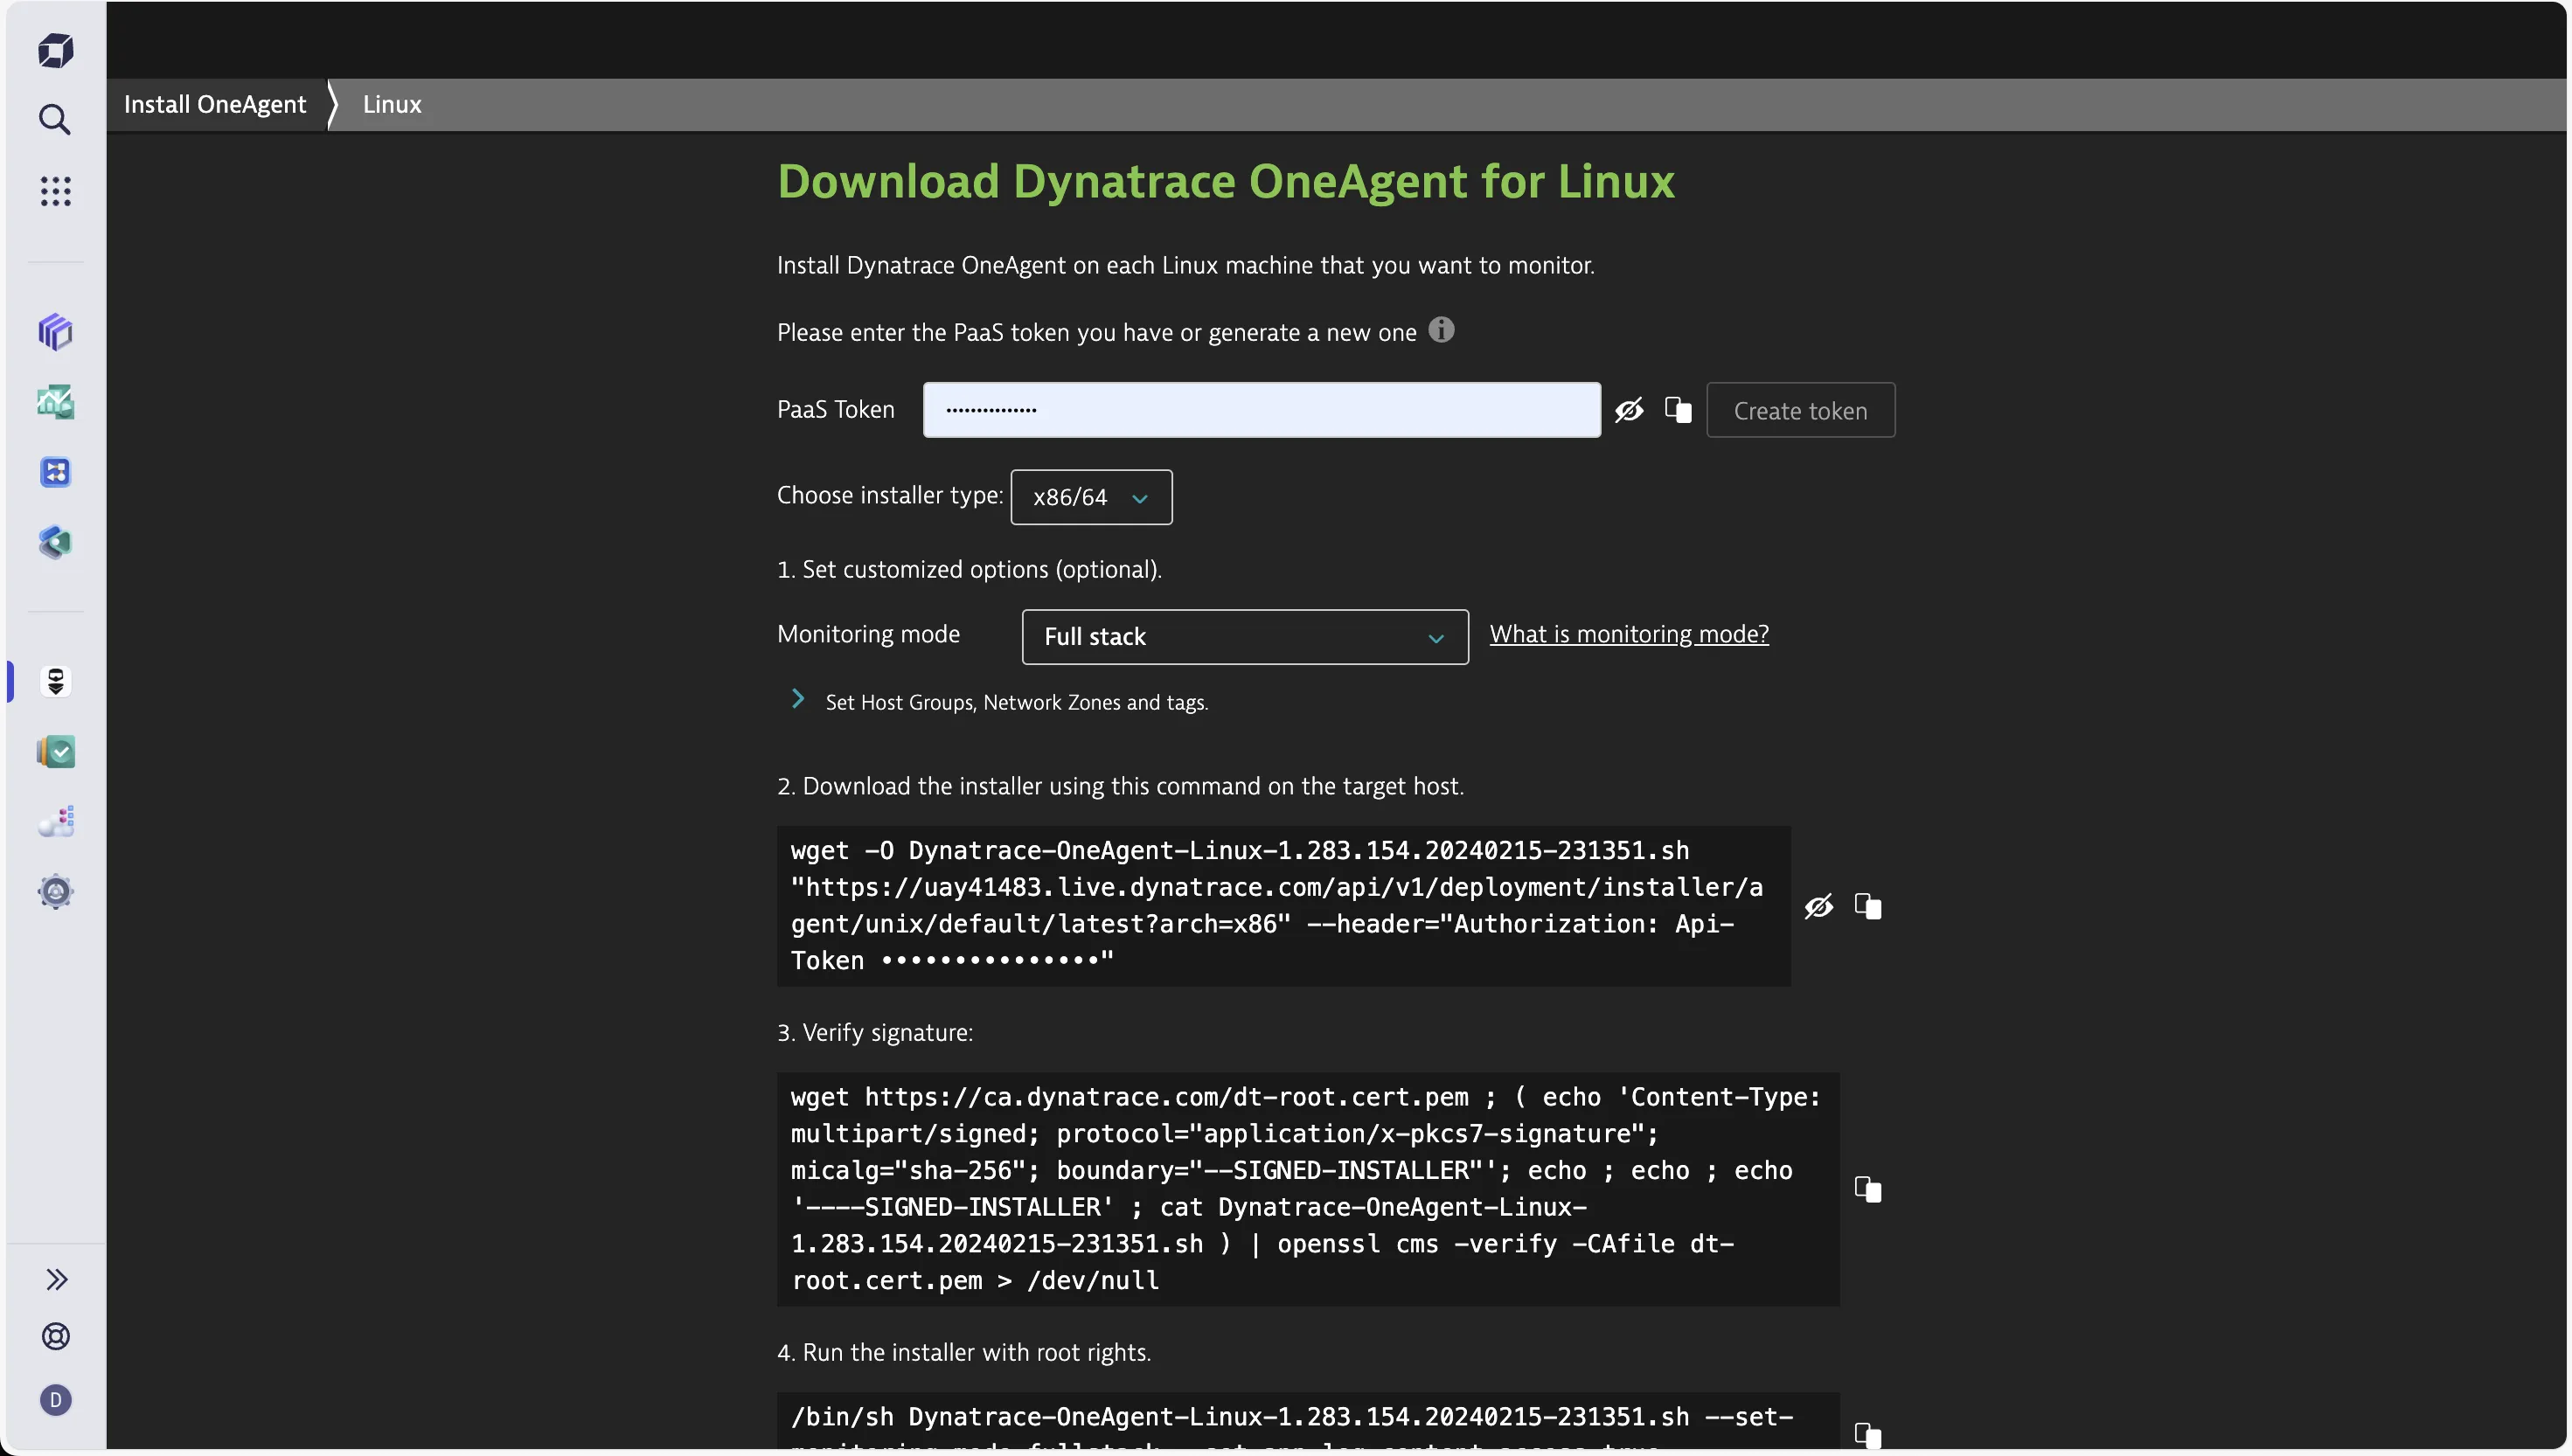 Dynatrace UI for installing OneAgent